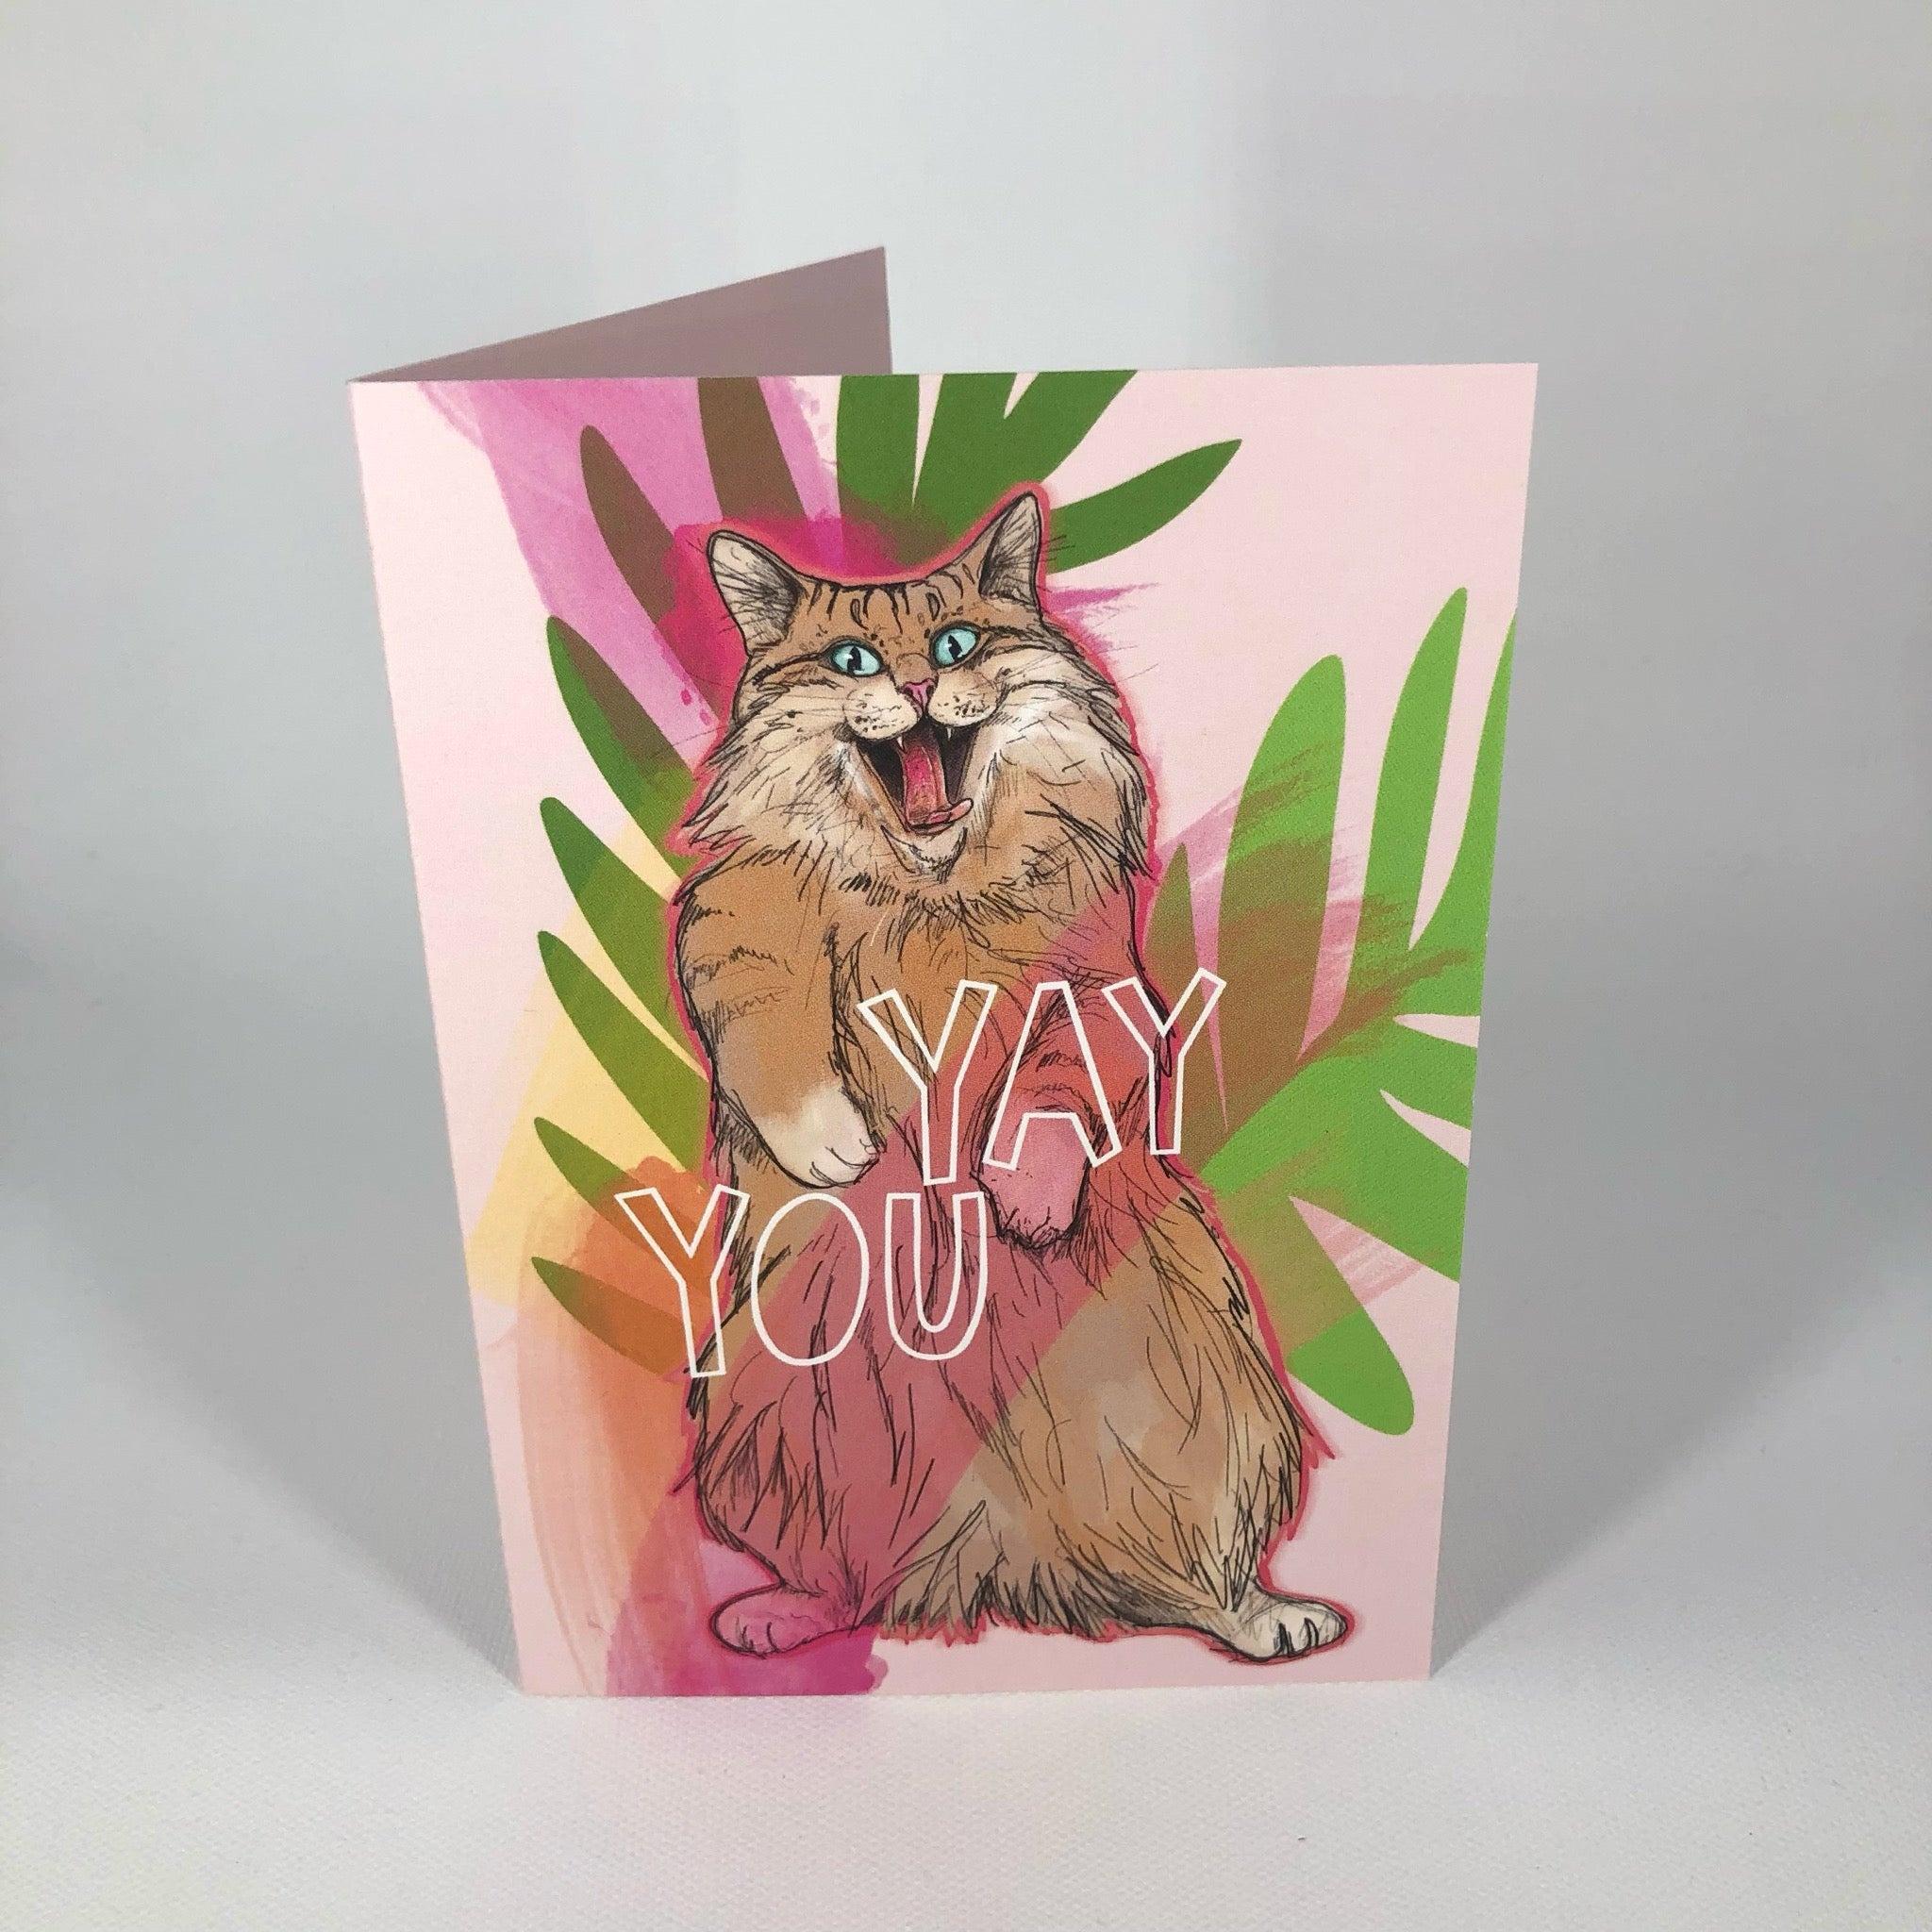 Cats On Legs - Yay You Greeting Card